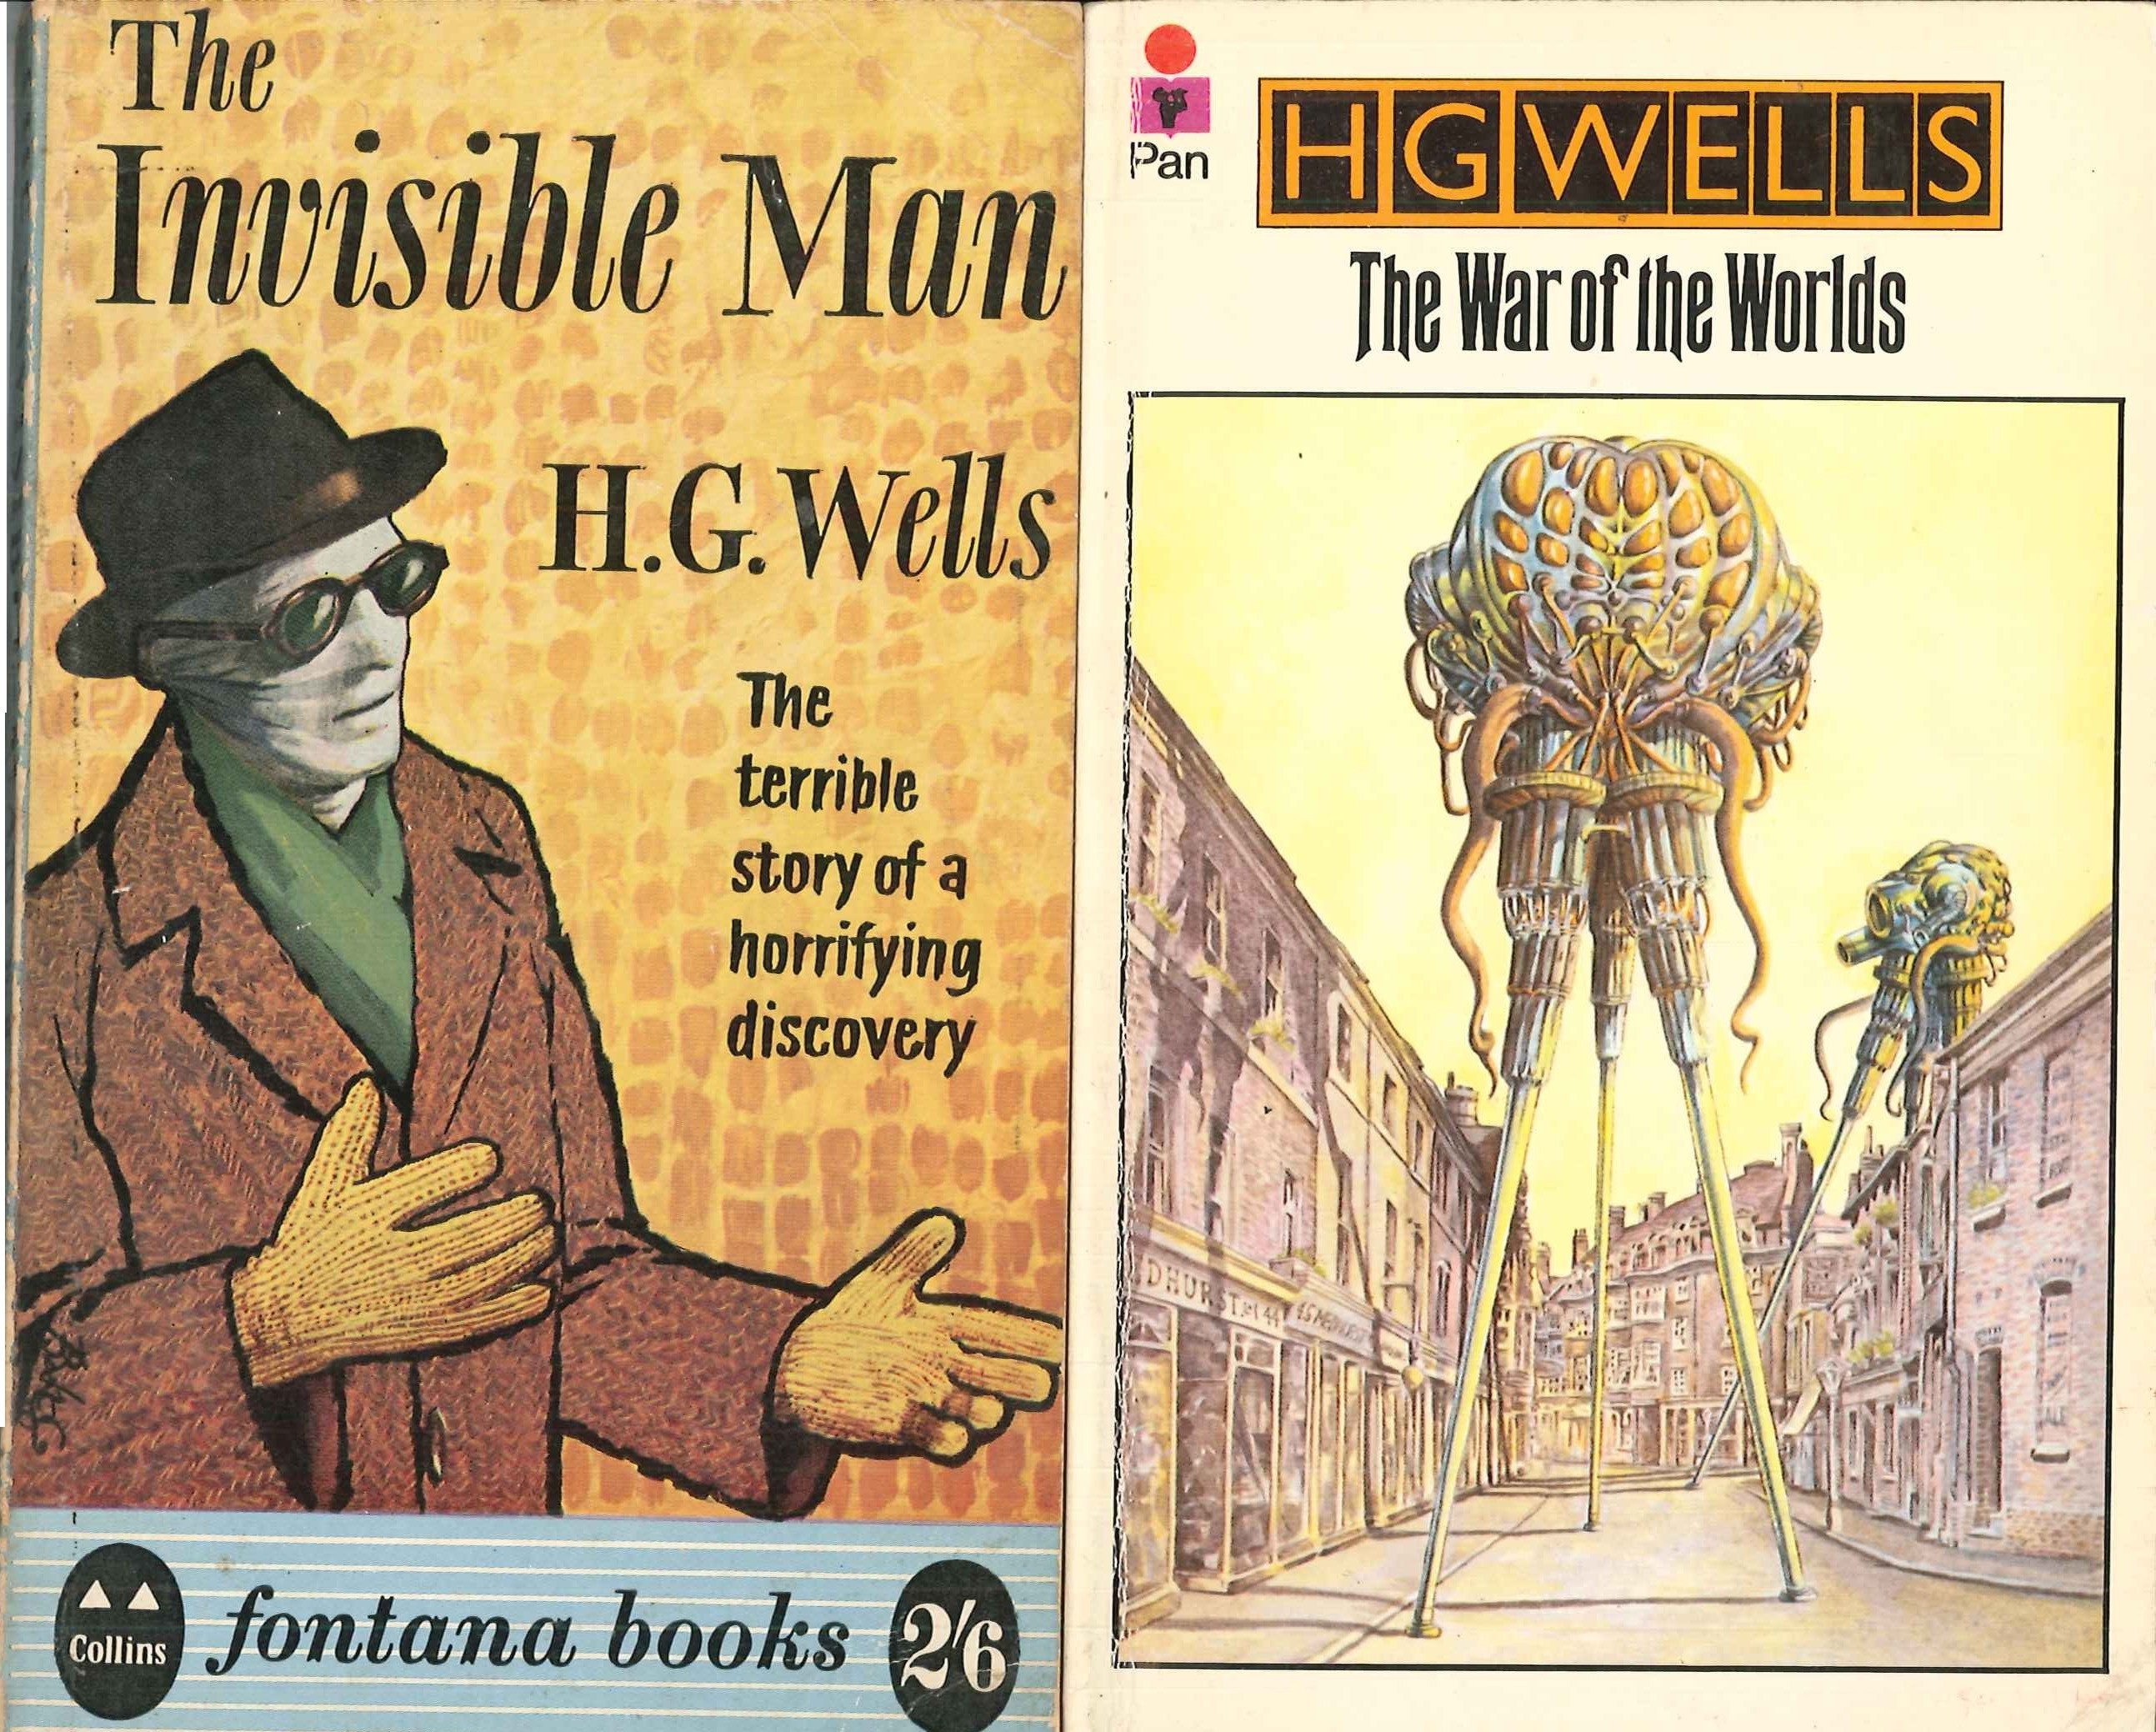 The Invincible man книга. A terrible story книга. Cretu the Invisible man. The time Machine (1905) and the Invisible man (1897)..